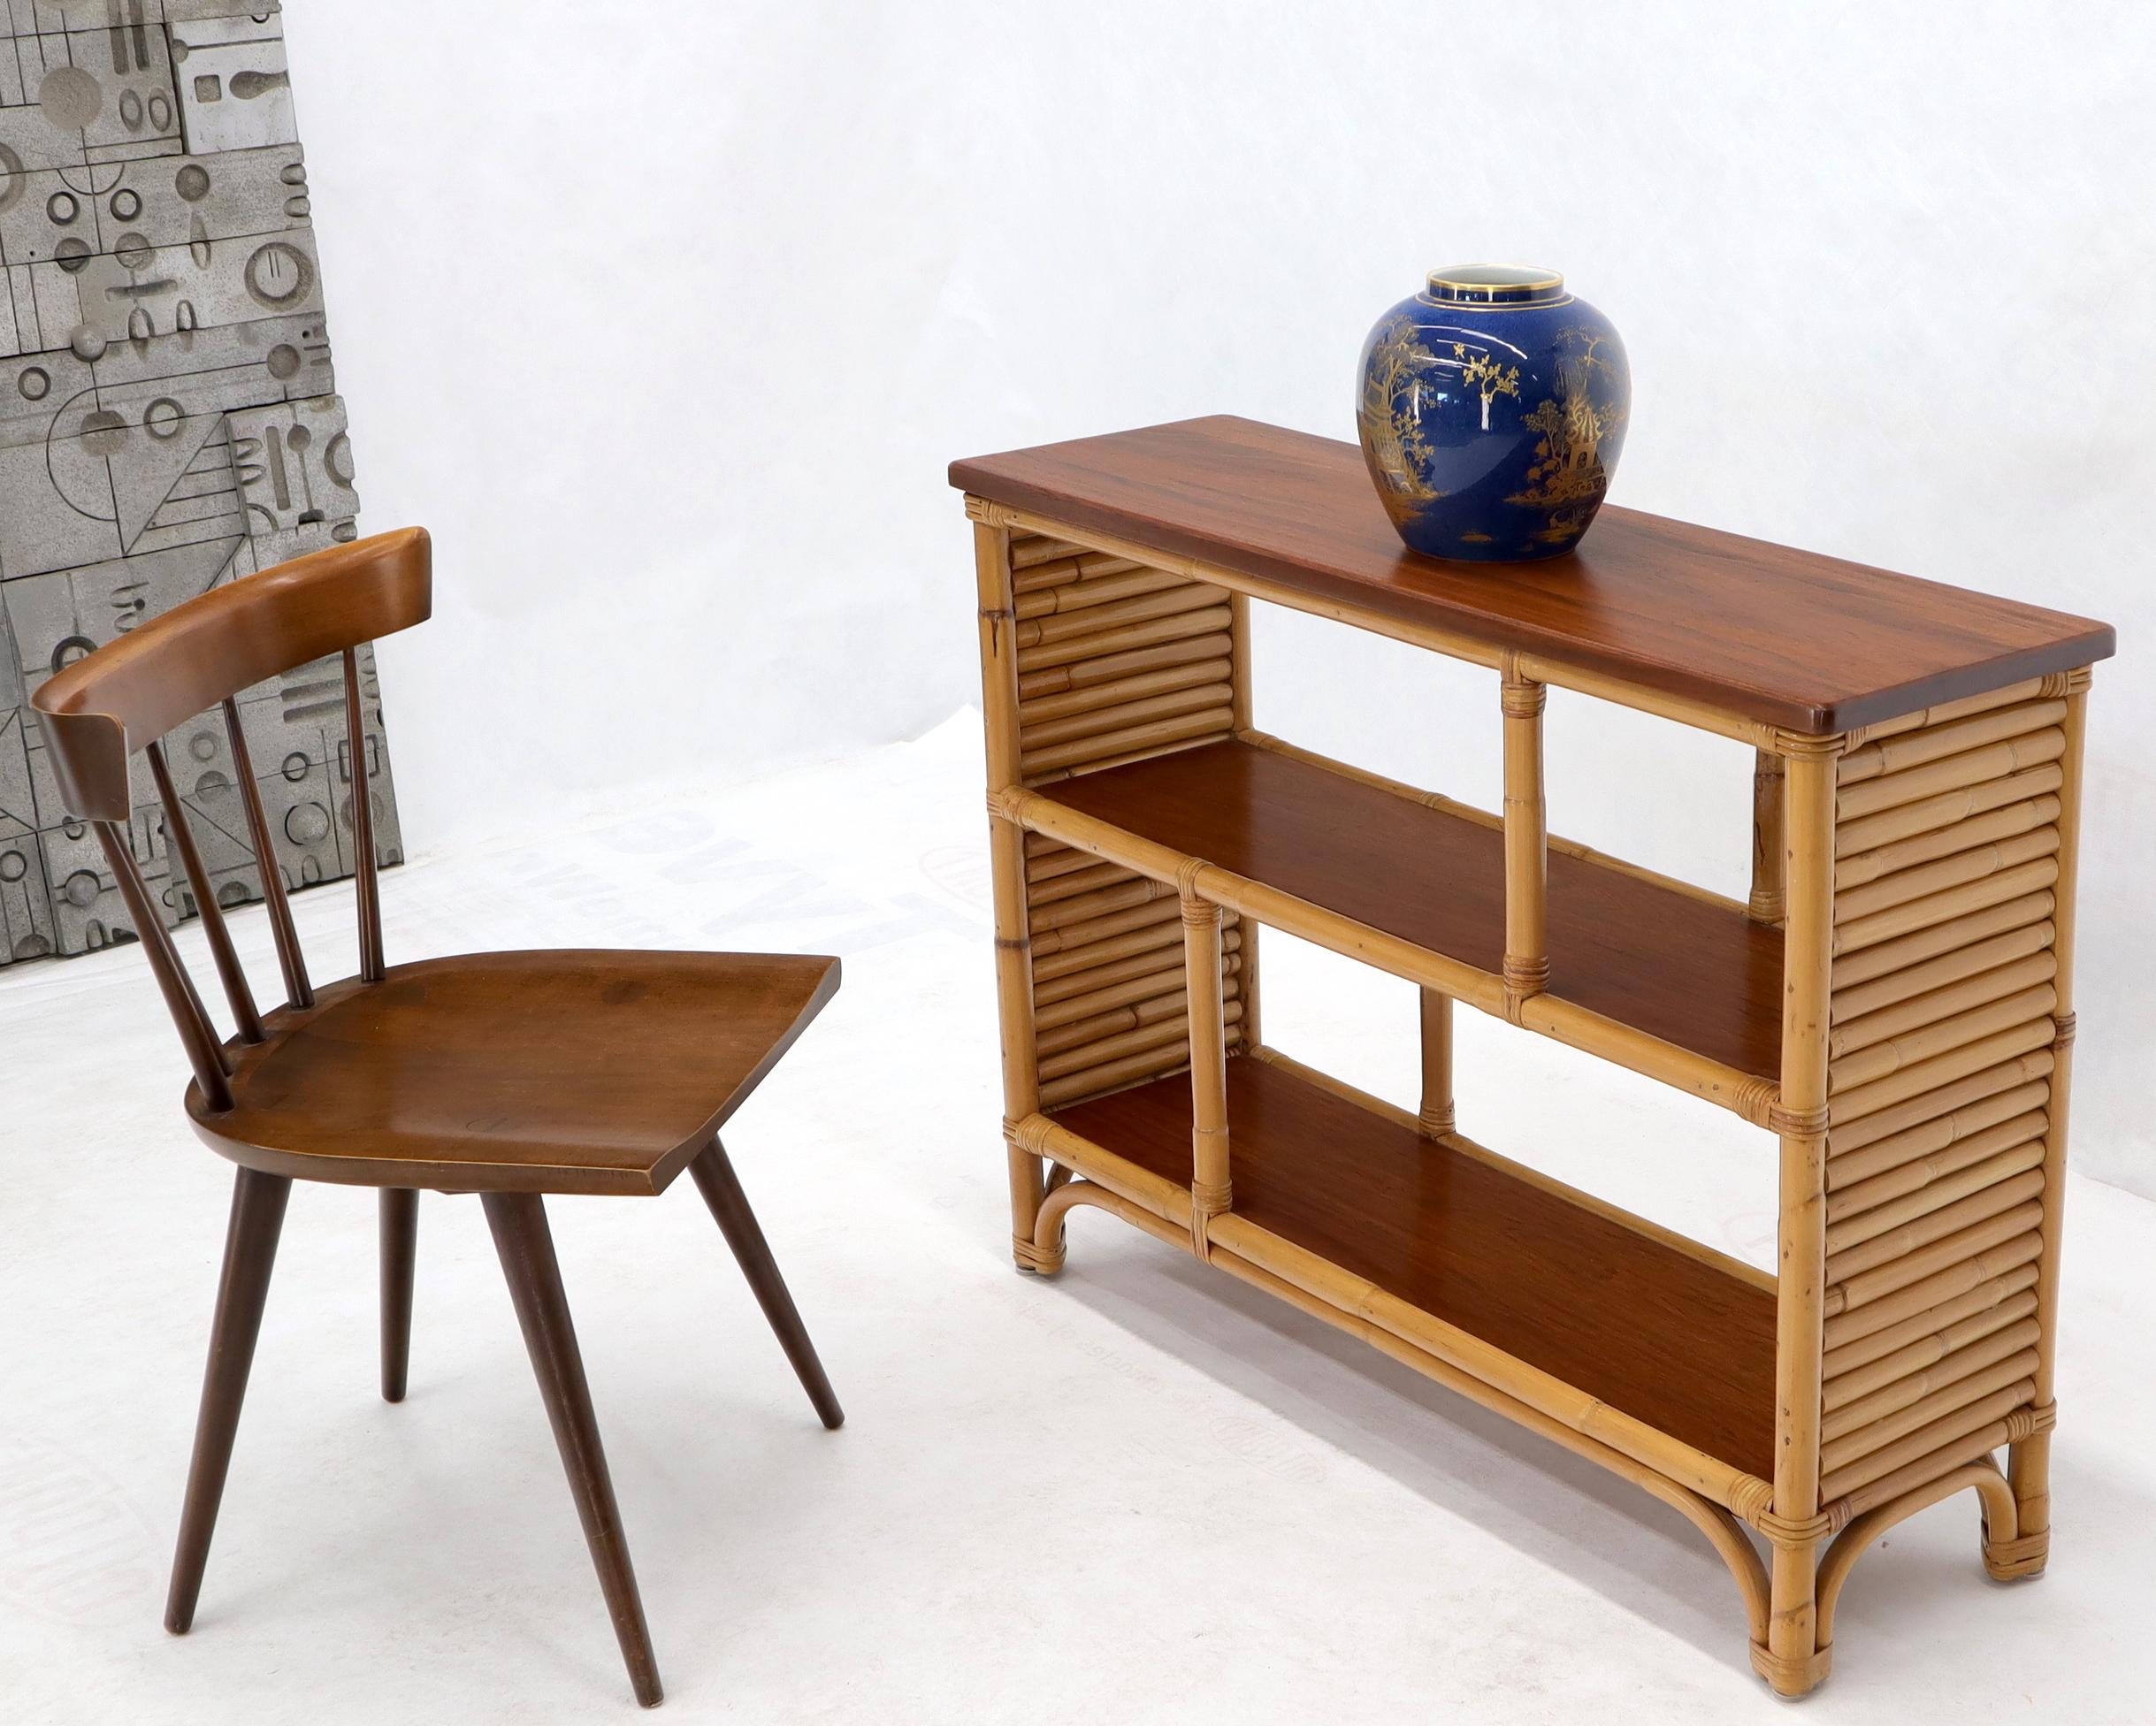 Very nice decorative Mid-Century Modern rattan and bamboo console table with bookcase like shelves.